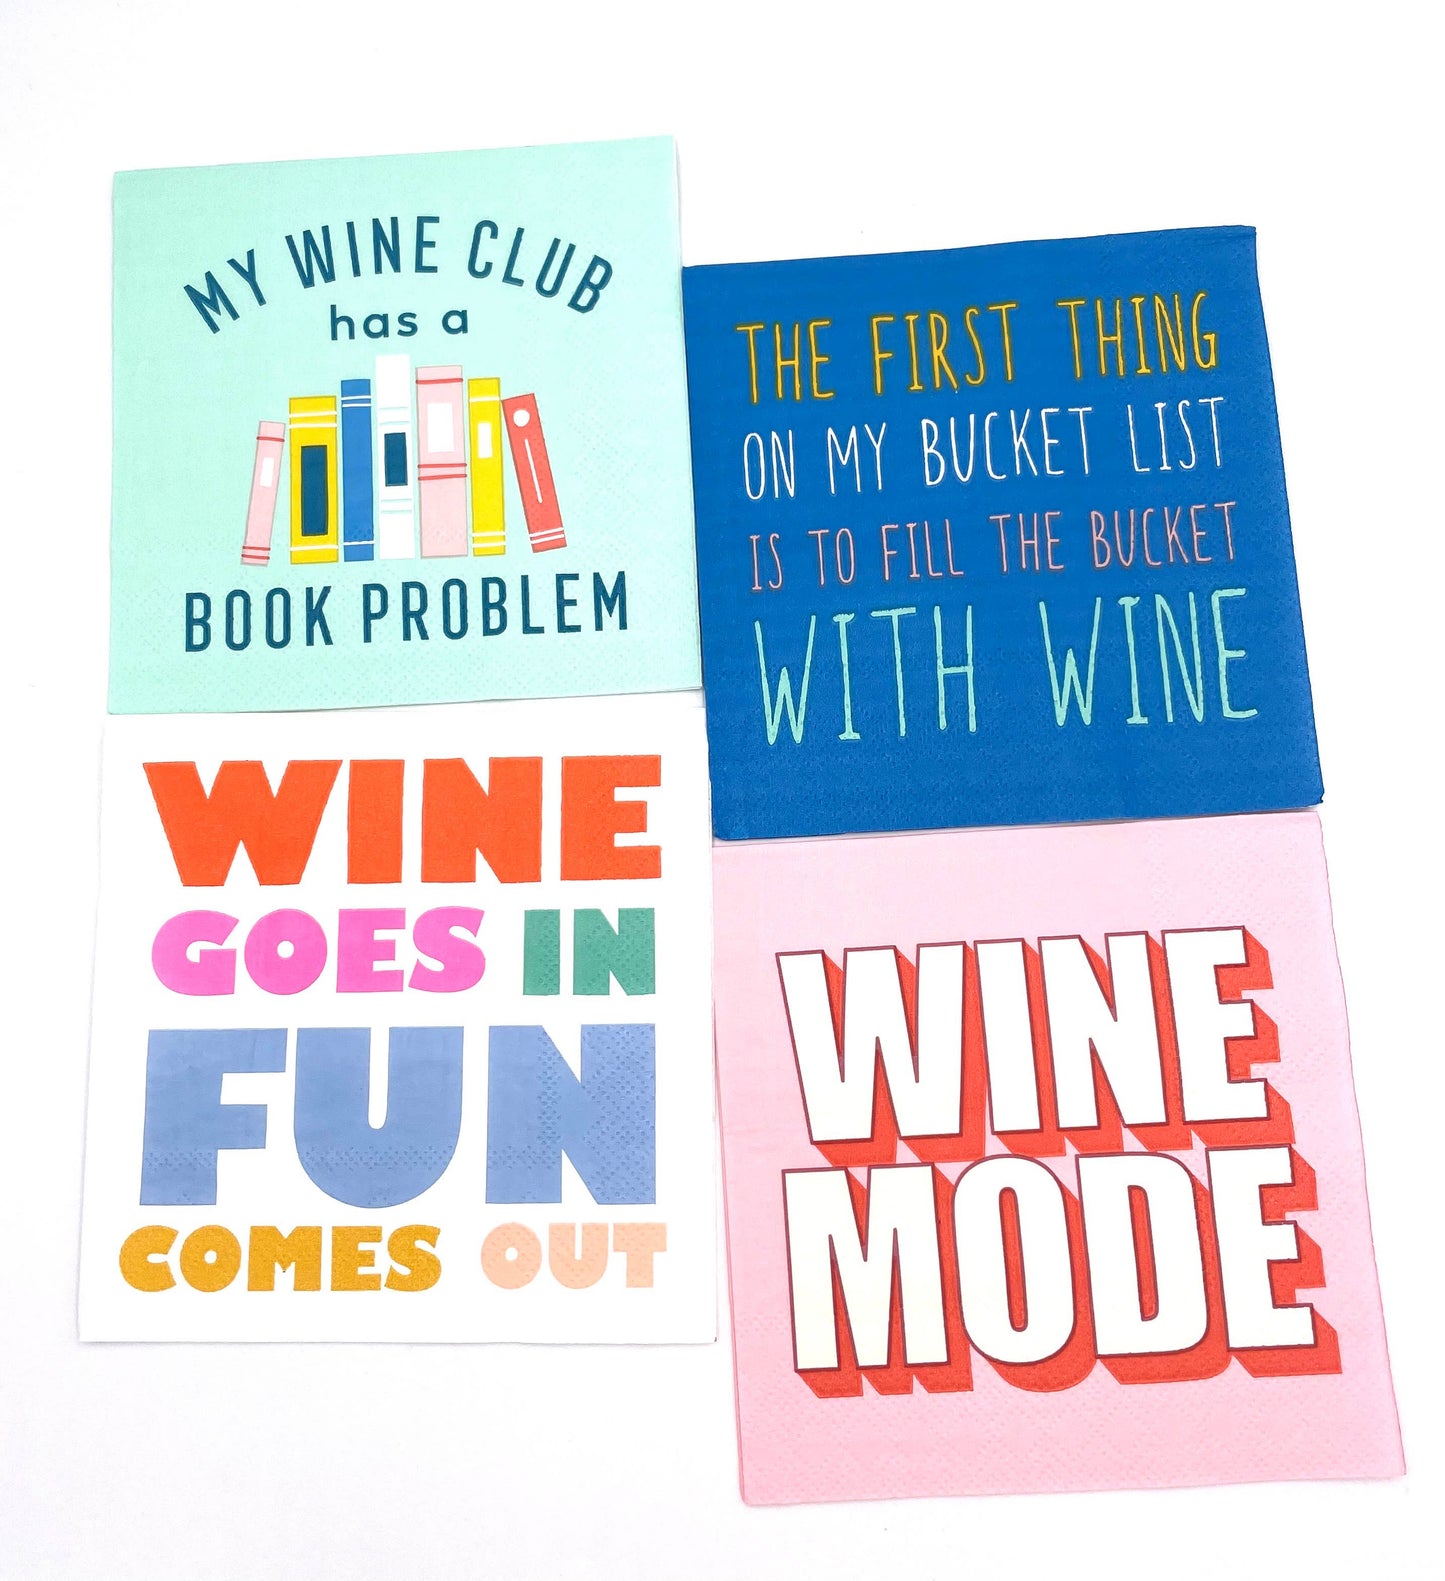 Cocktail Napkins | My Wine Club Has A Book Problem - 20ct